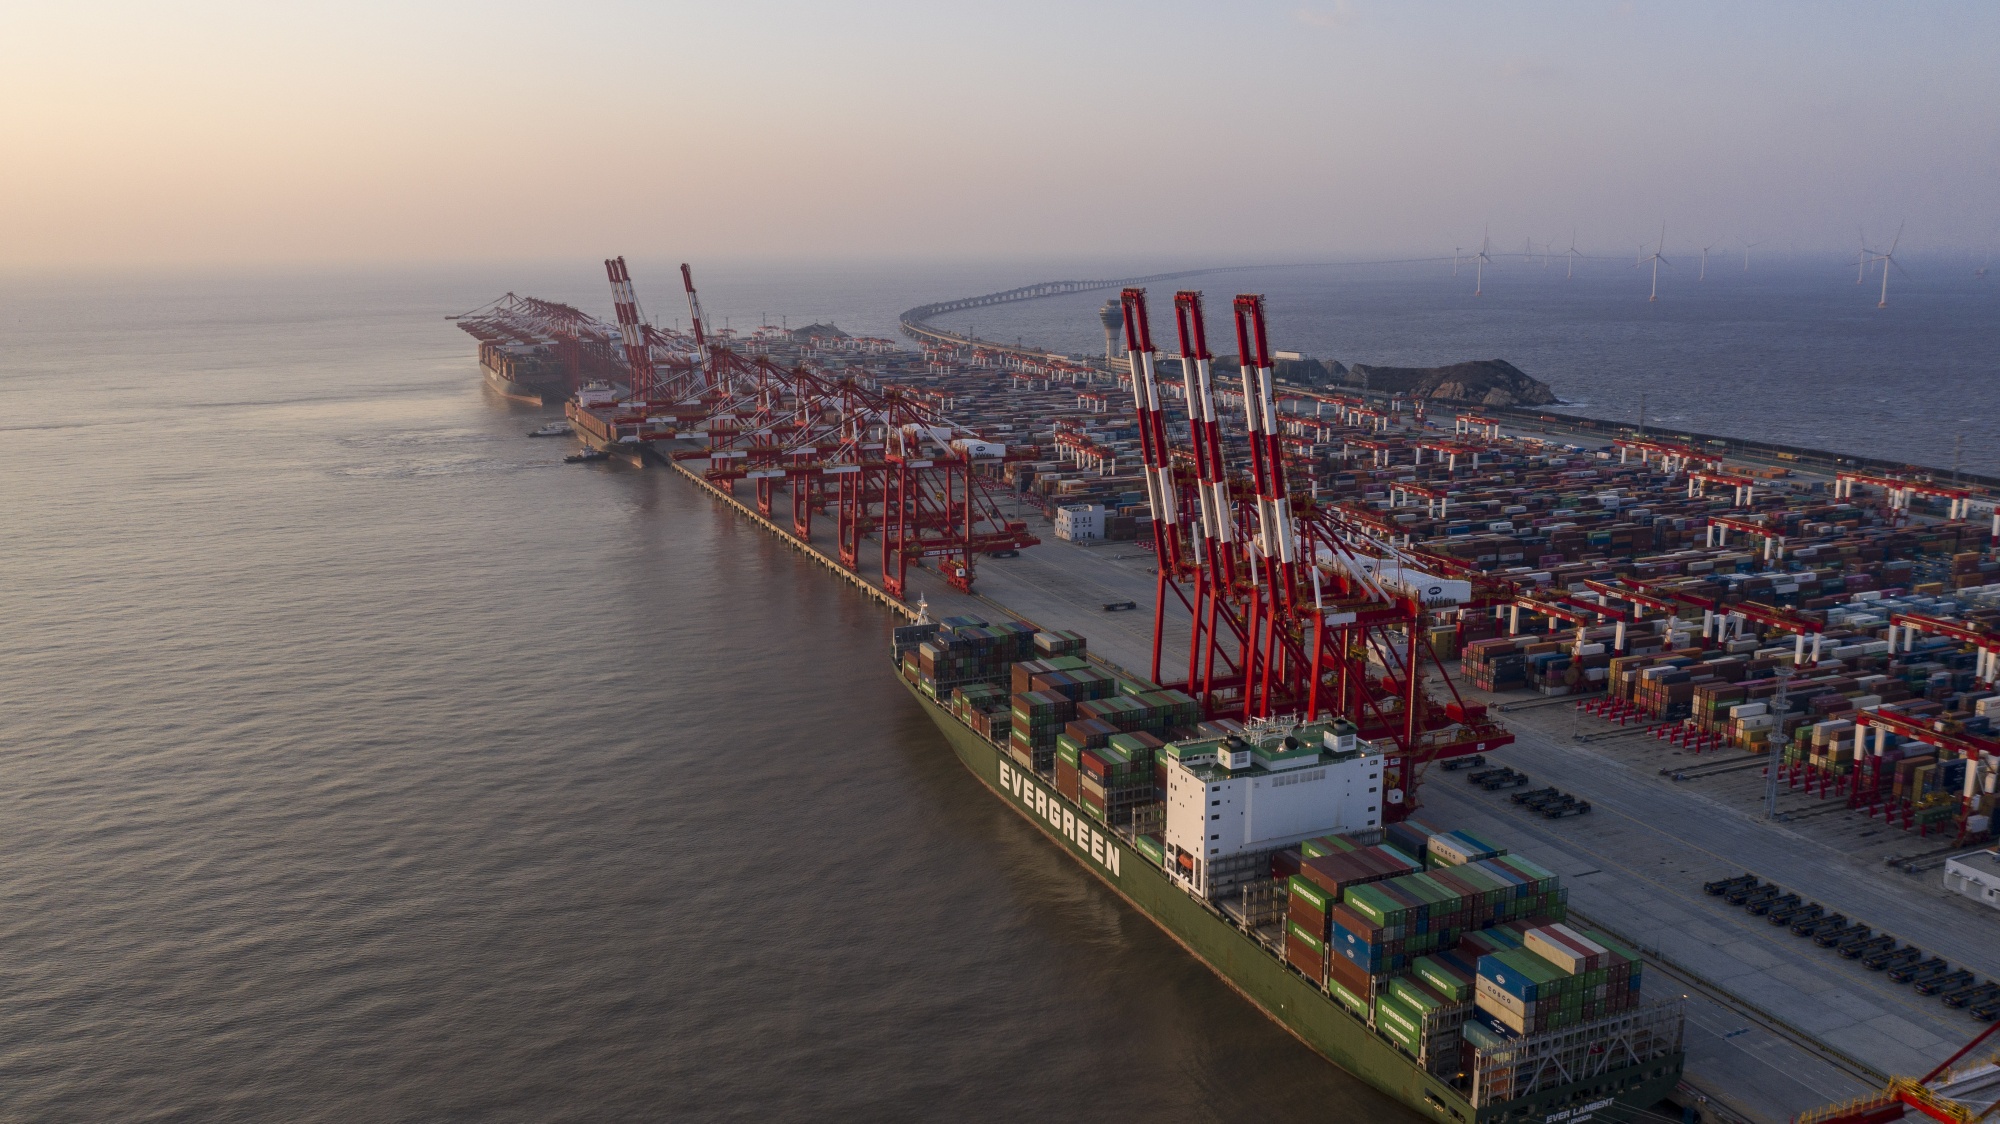 Supply Chain Latest: Pace of China's Trade Slowdown Comes Into